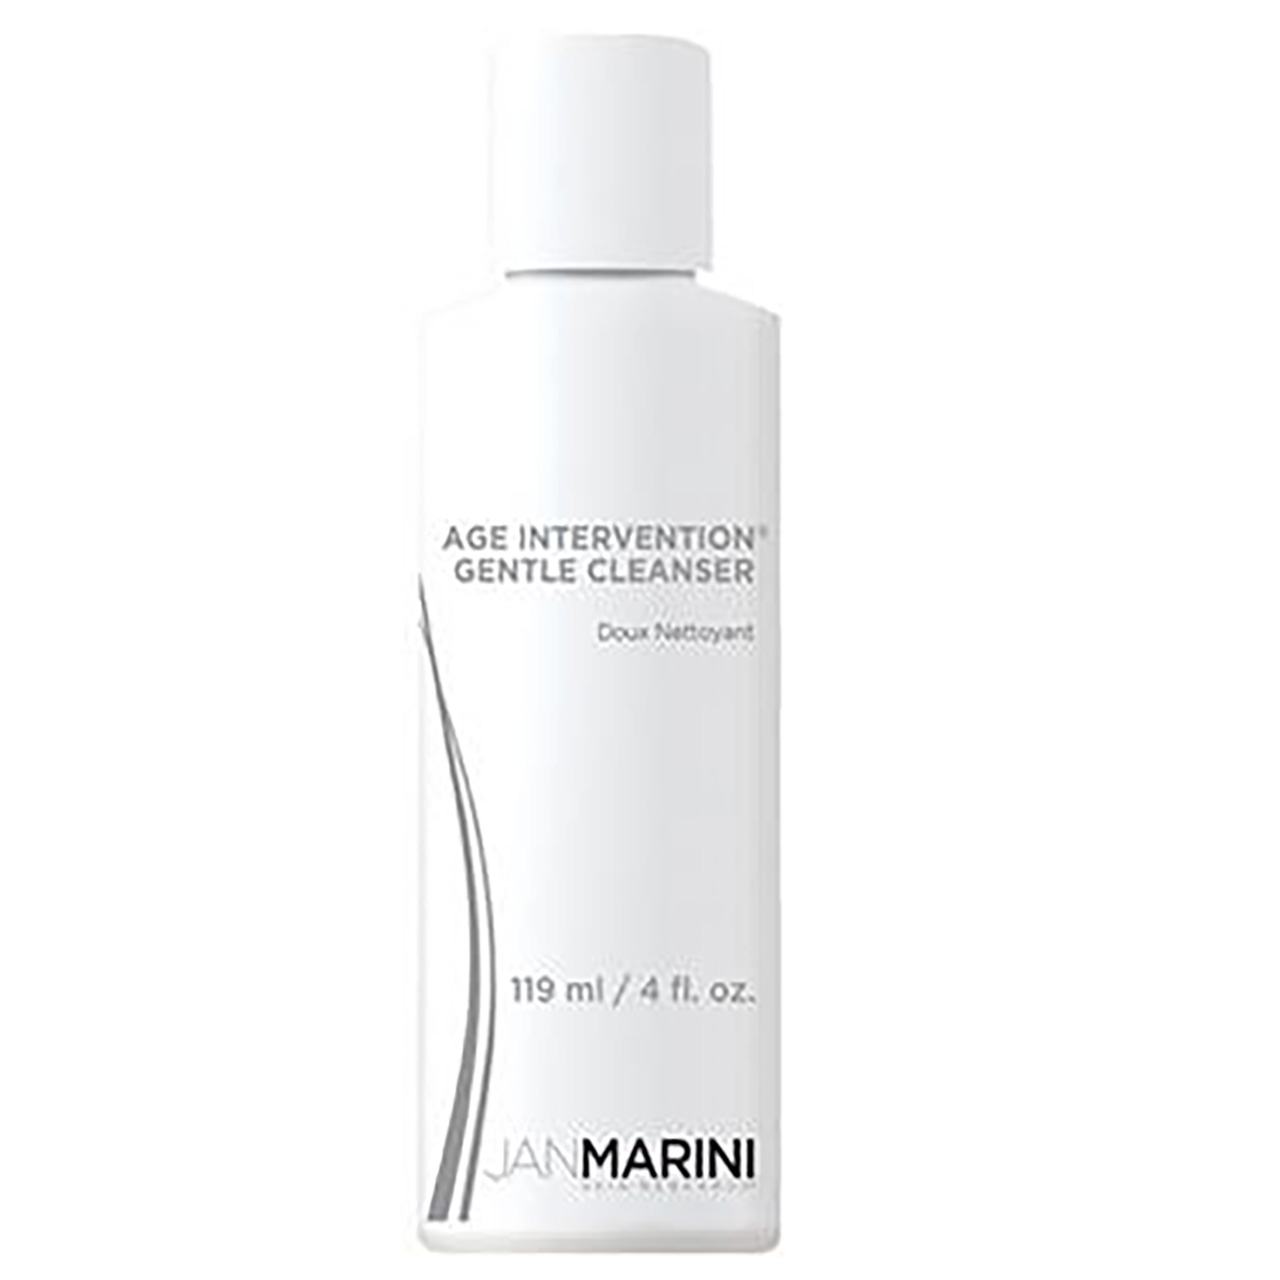 Jan Marini Age Intervention Gentle Cleanser - 4 oz (A0137.1) Exp:3/24 Questions & Answers